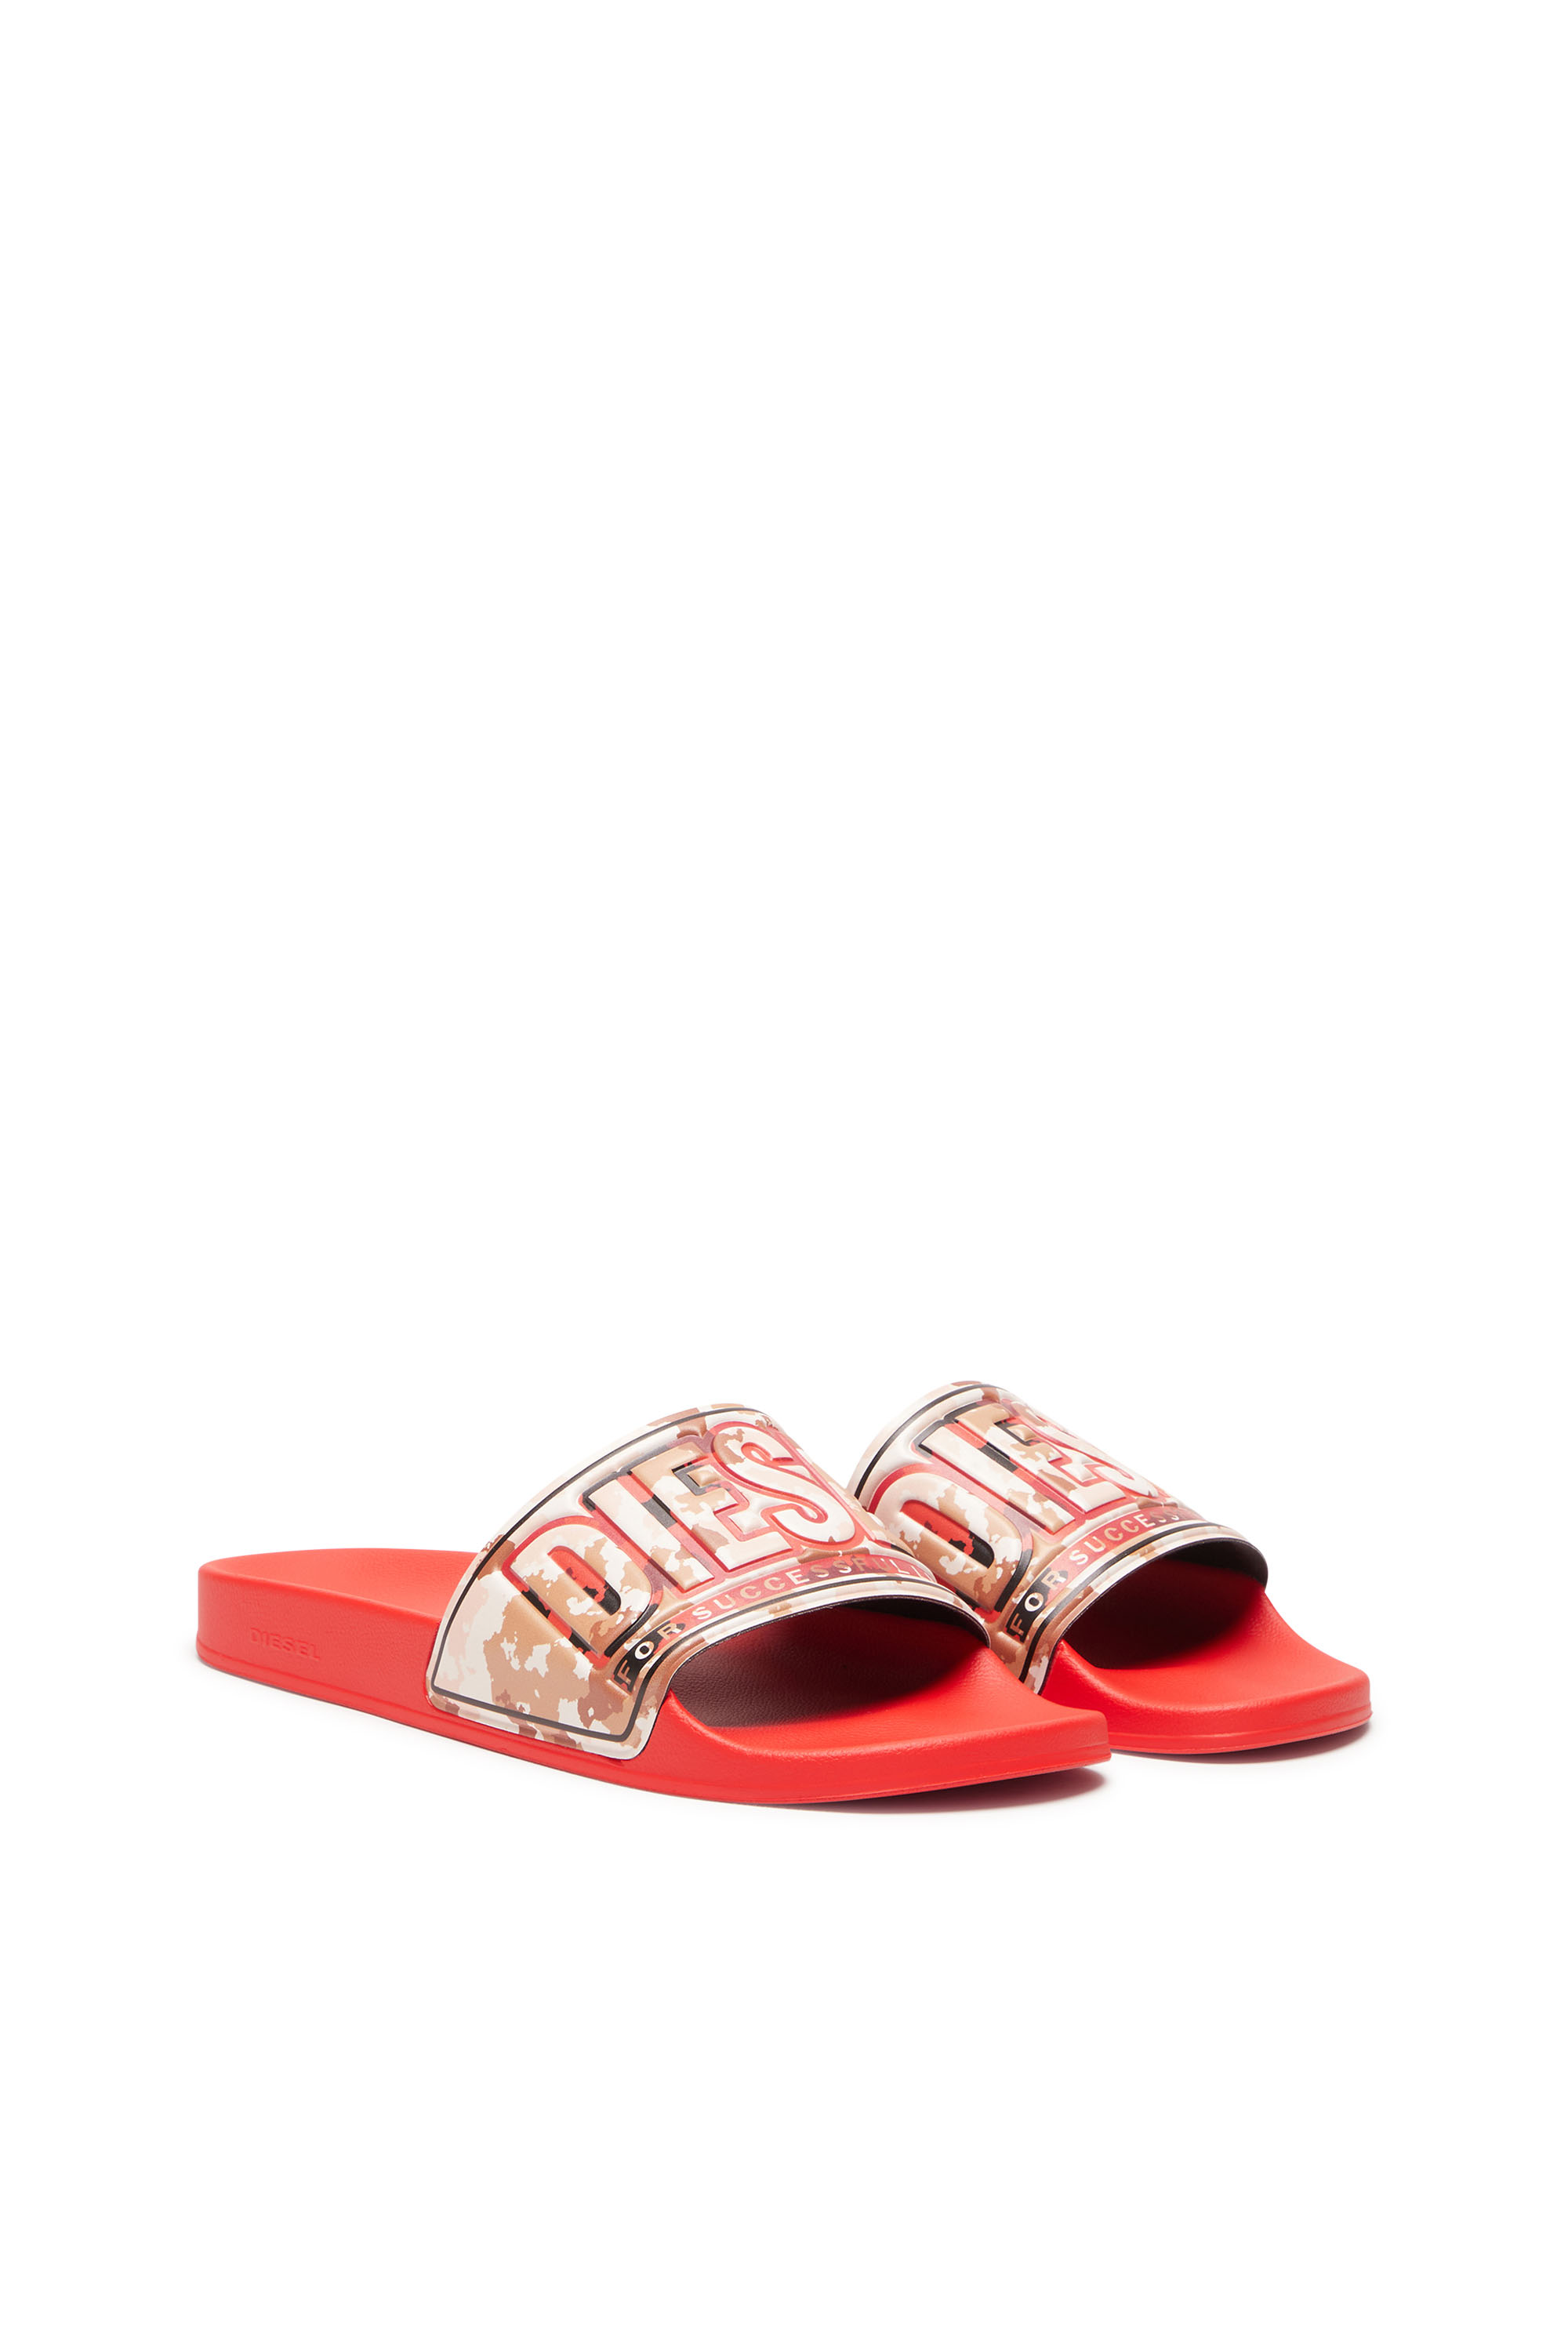 Diesel - SA-MAYEMI CC X, Unisex Sa-Mayemi CC X - Pool slides with camouflage band in Red - Image 2